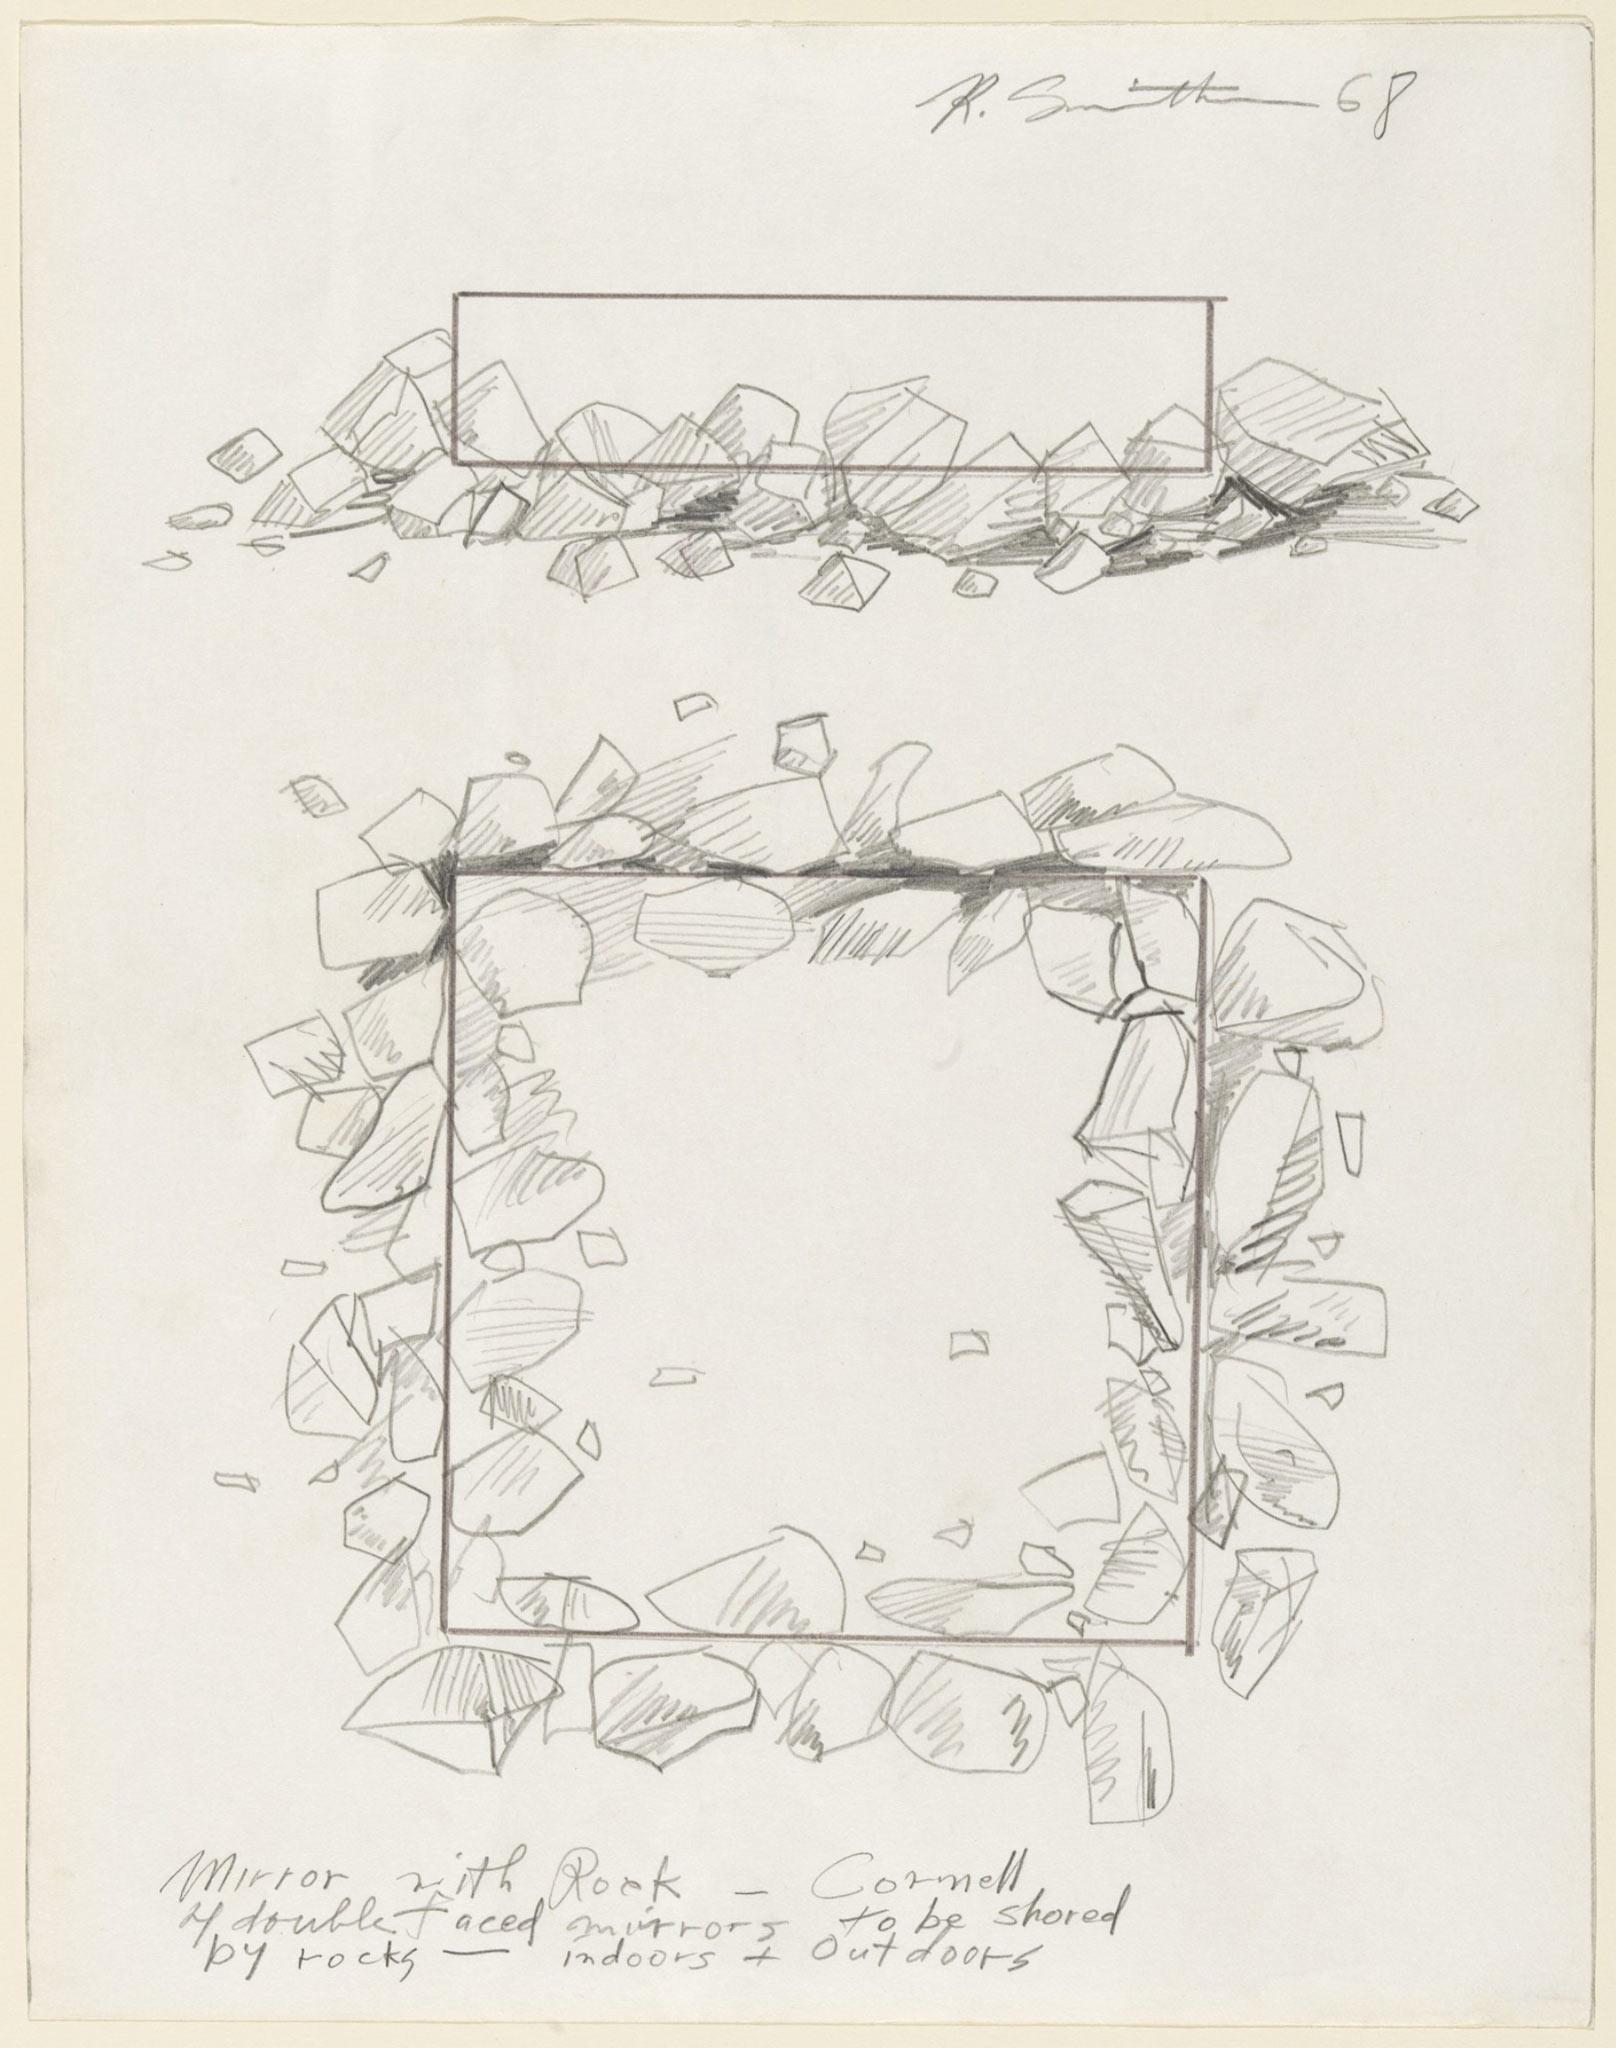 graphite drawing with a cross section drawing and top down view of a sculpture made using mirrors and rocks